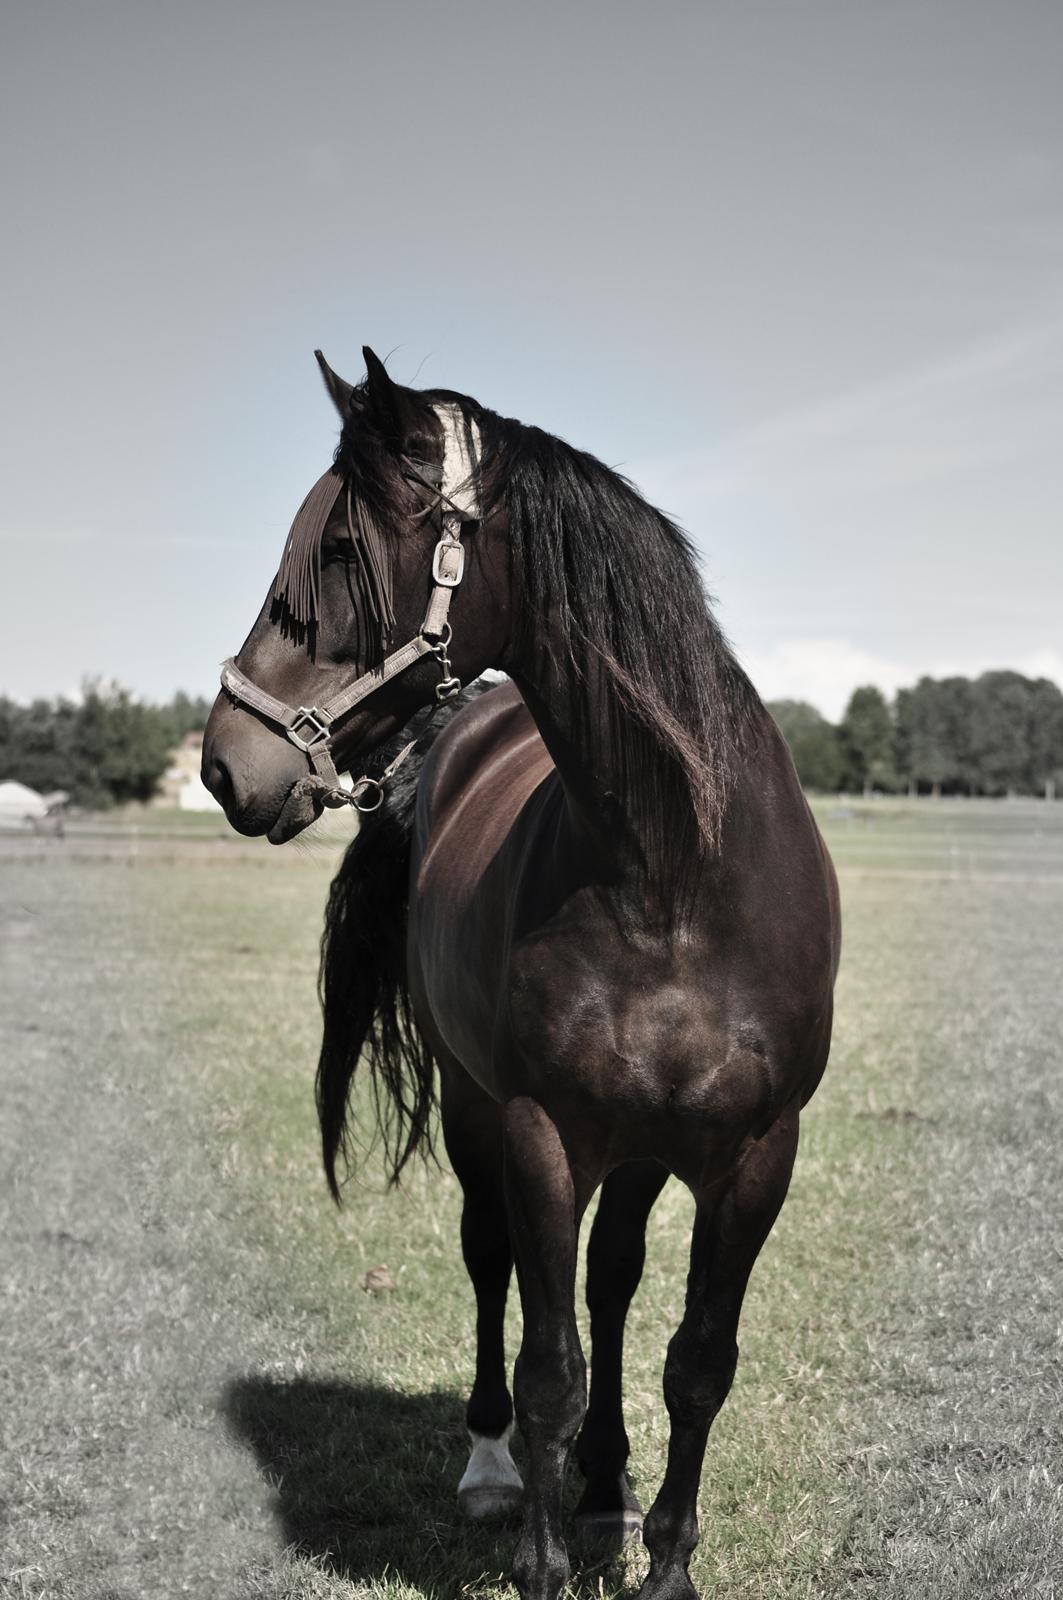 Oldenborg Sigersholmgårds Uno-boy - Force can never produce anything beautiful. We cannot use force with our horse. If we want to see the beauty of his natural movement, we have to treat, handle and respect him as our friend. And what a friend he can be. billede 13